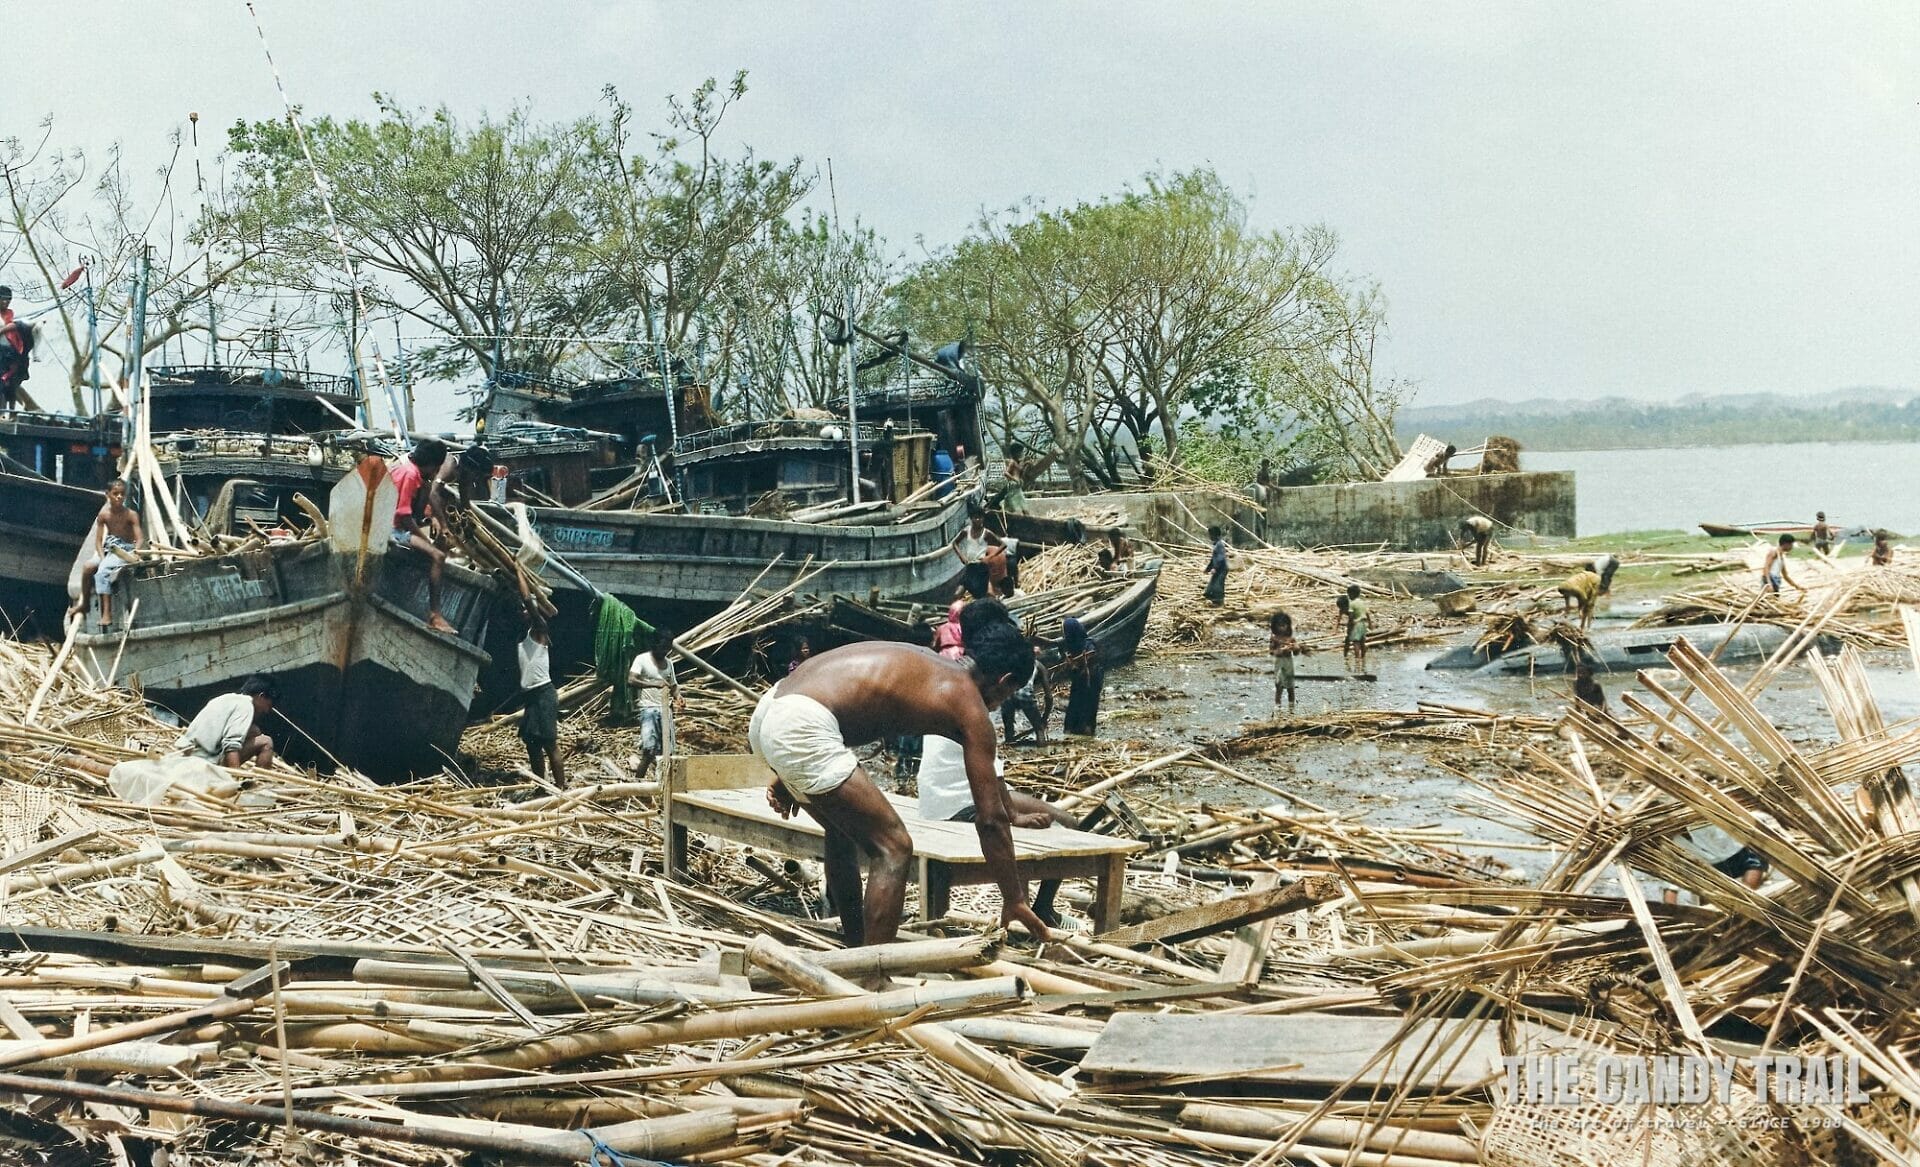 after the cyclone - boats shoved ashore in Cox's Bazar cyclone Bangladesh in 1991.